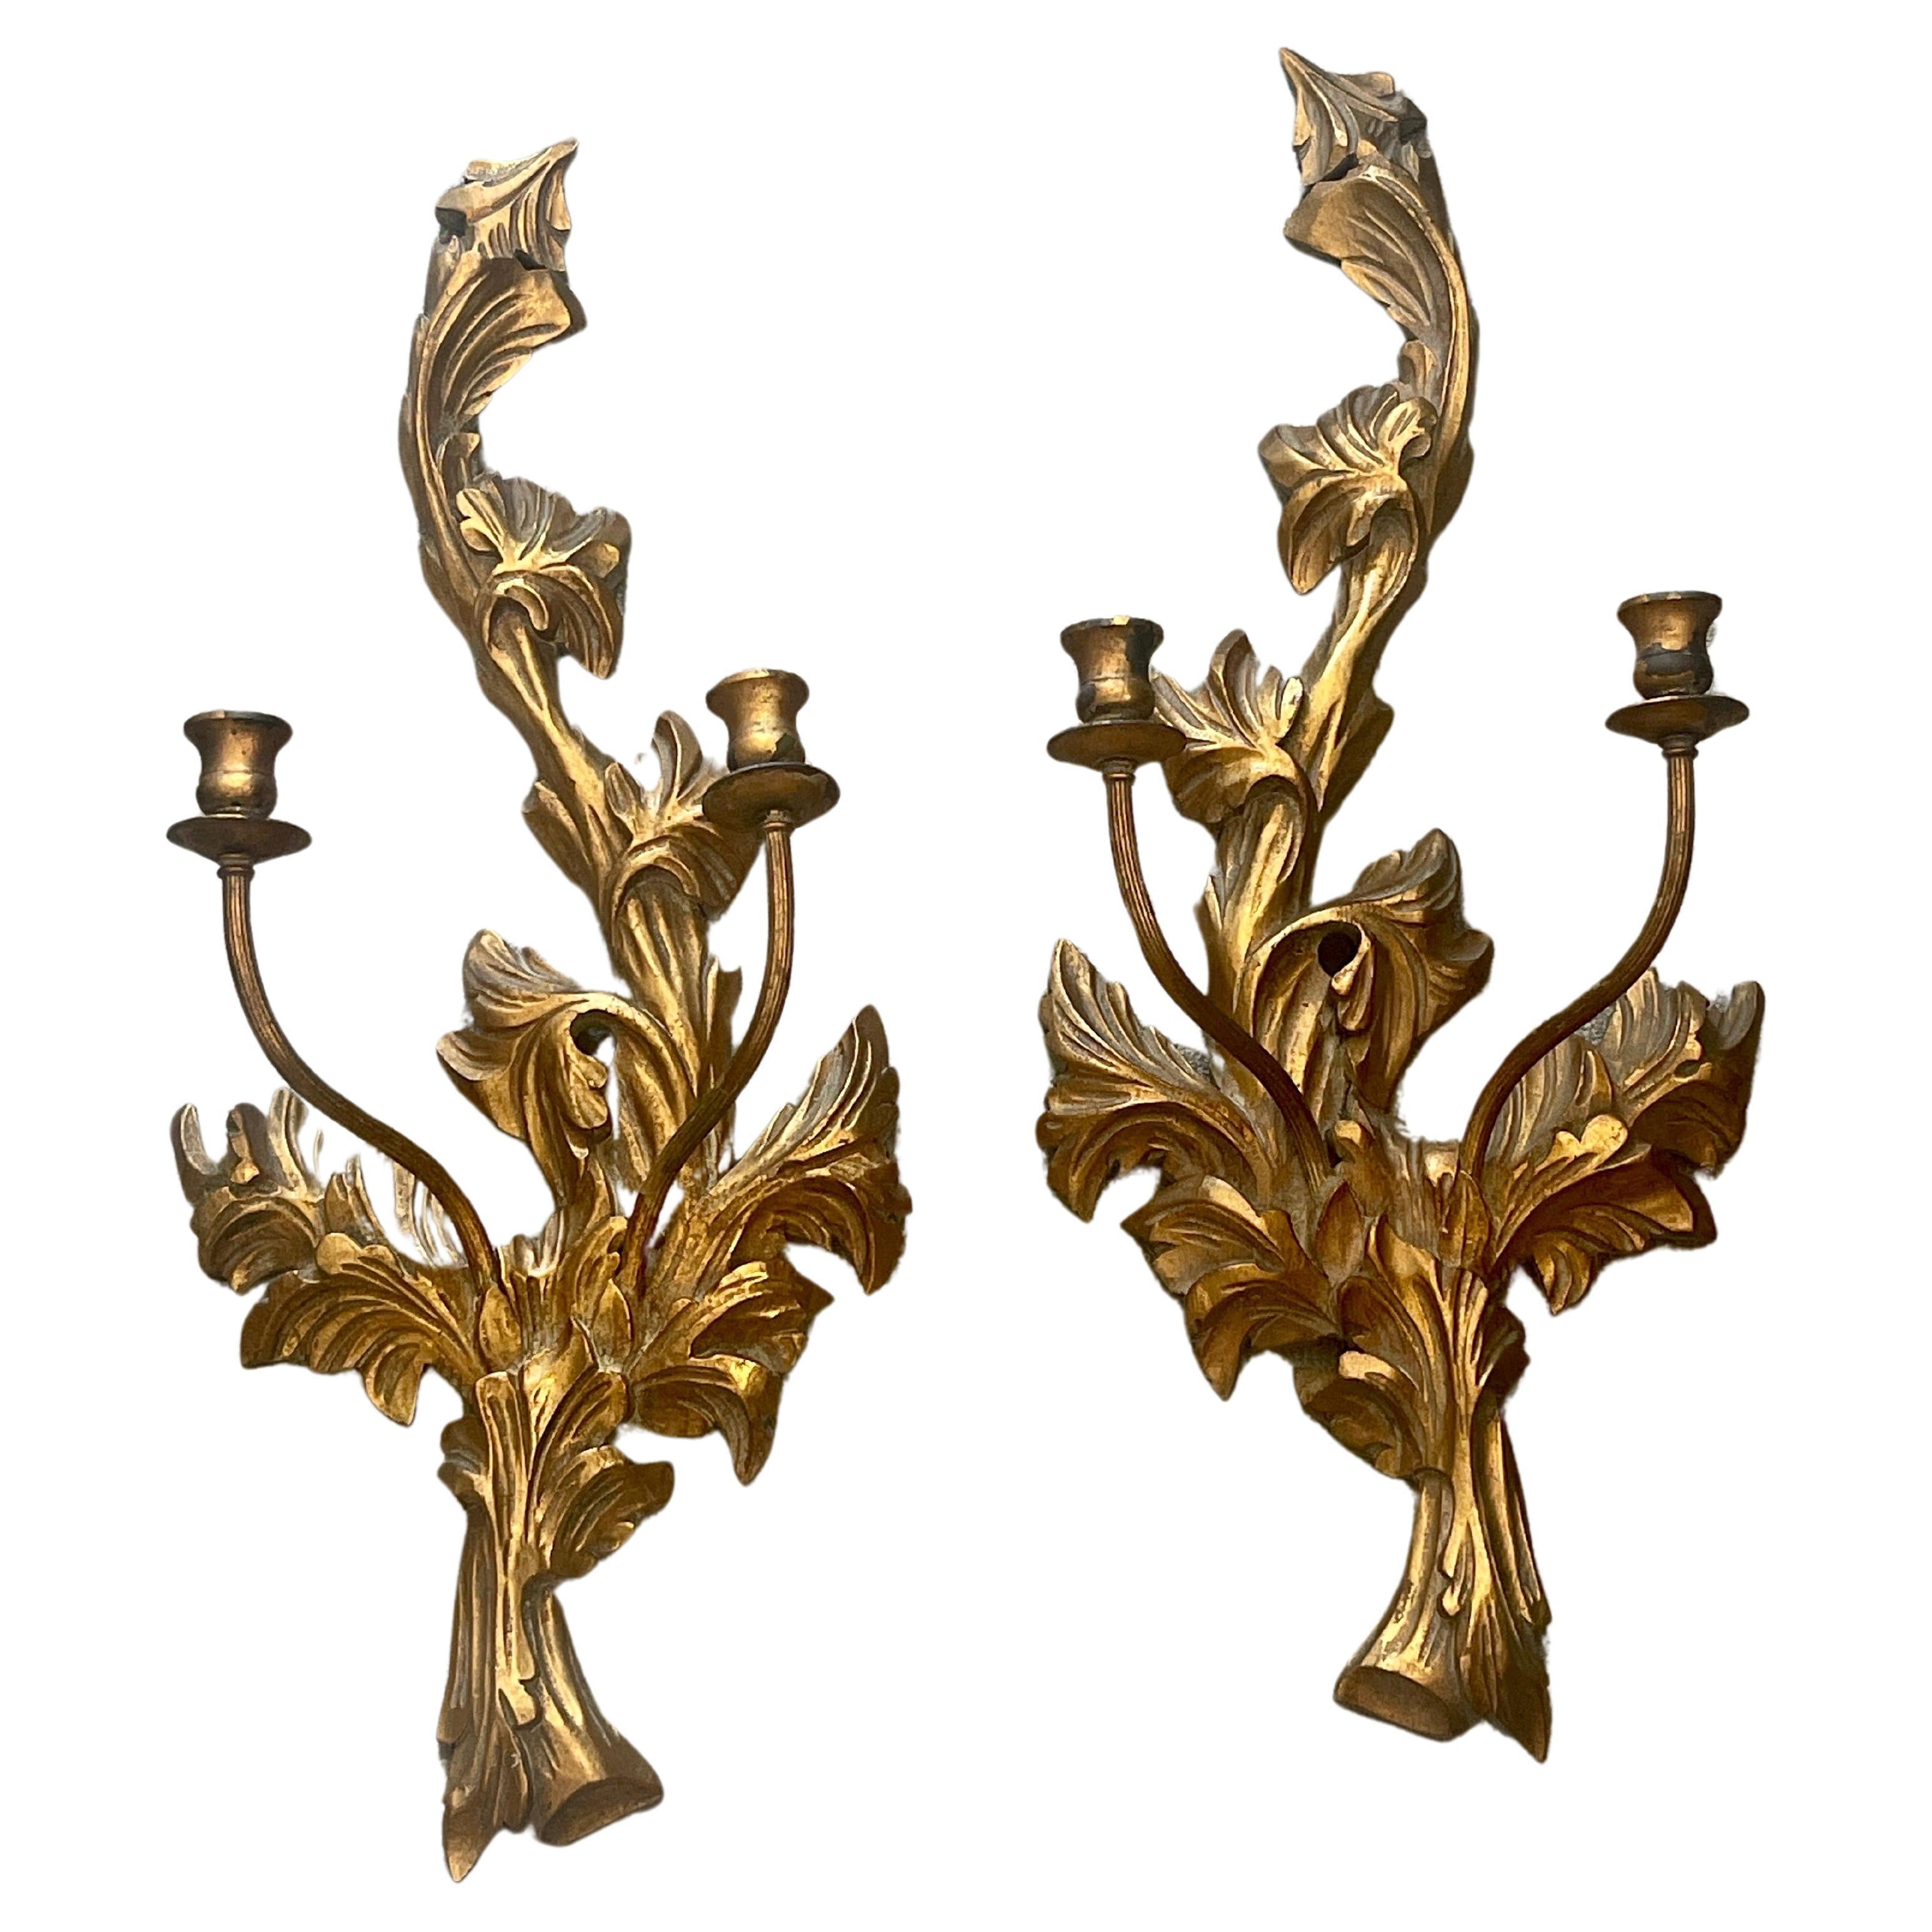 Pair of Italian Carved & Gilt Wood Candle Wall Sconces